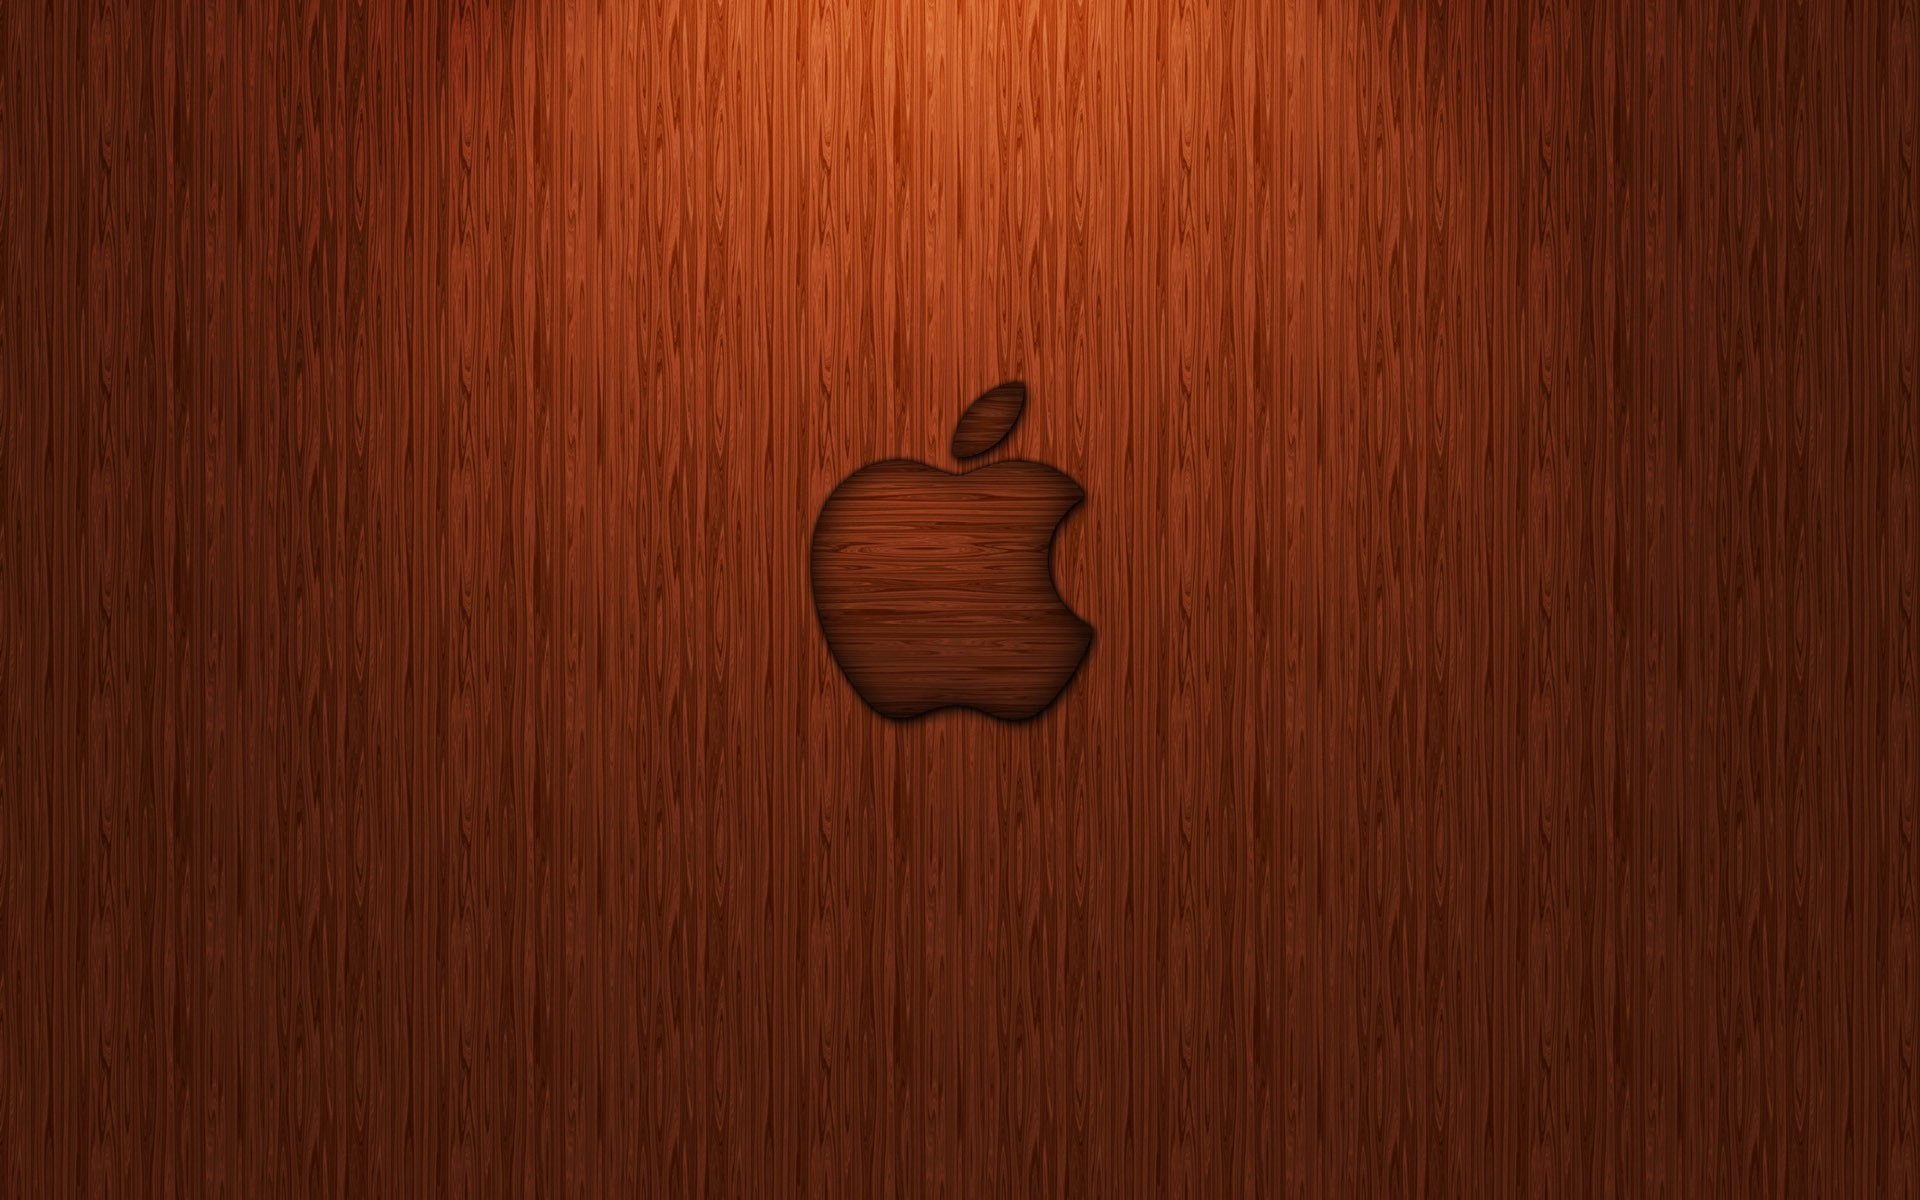 Logos Backgrounds In High Quality Wooden Apple Logo by Mindy